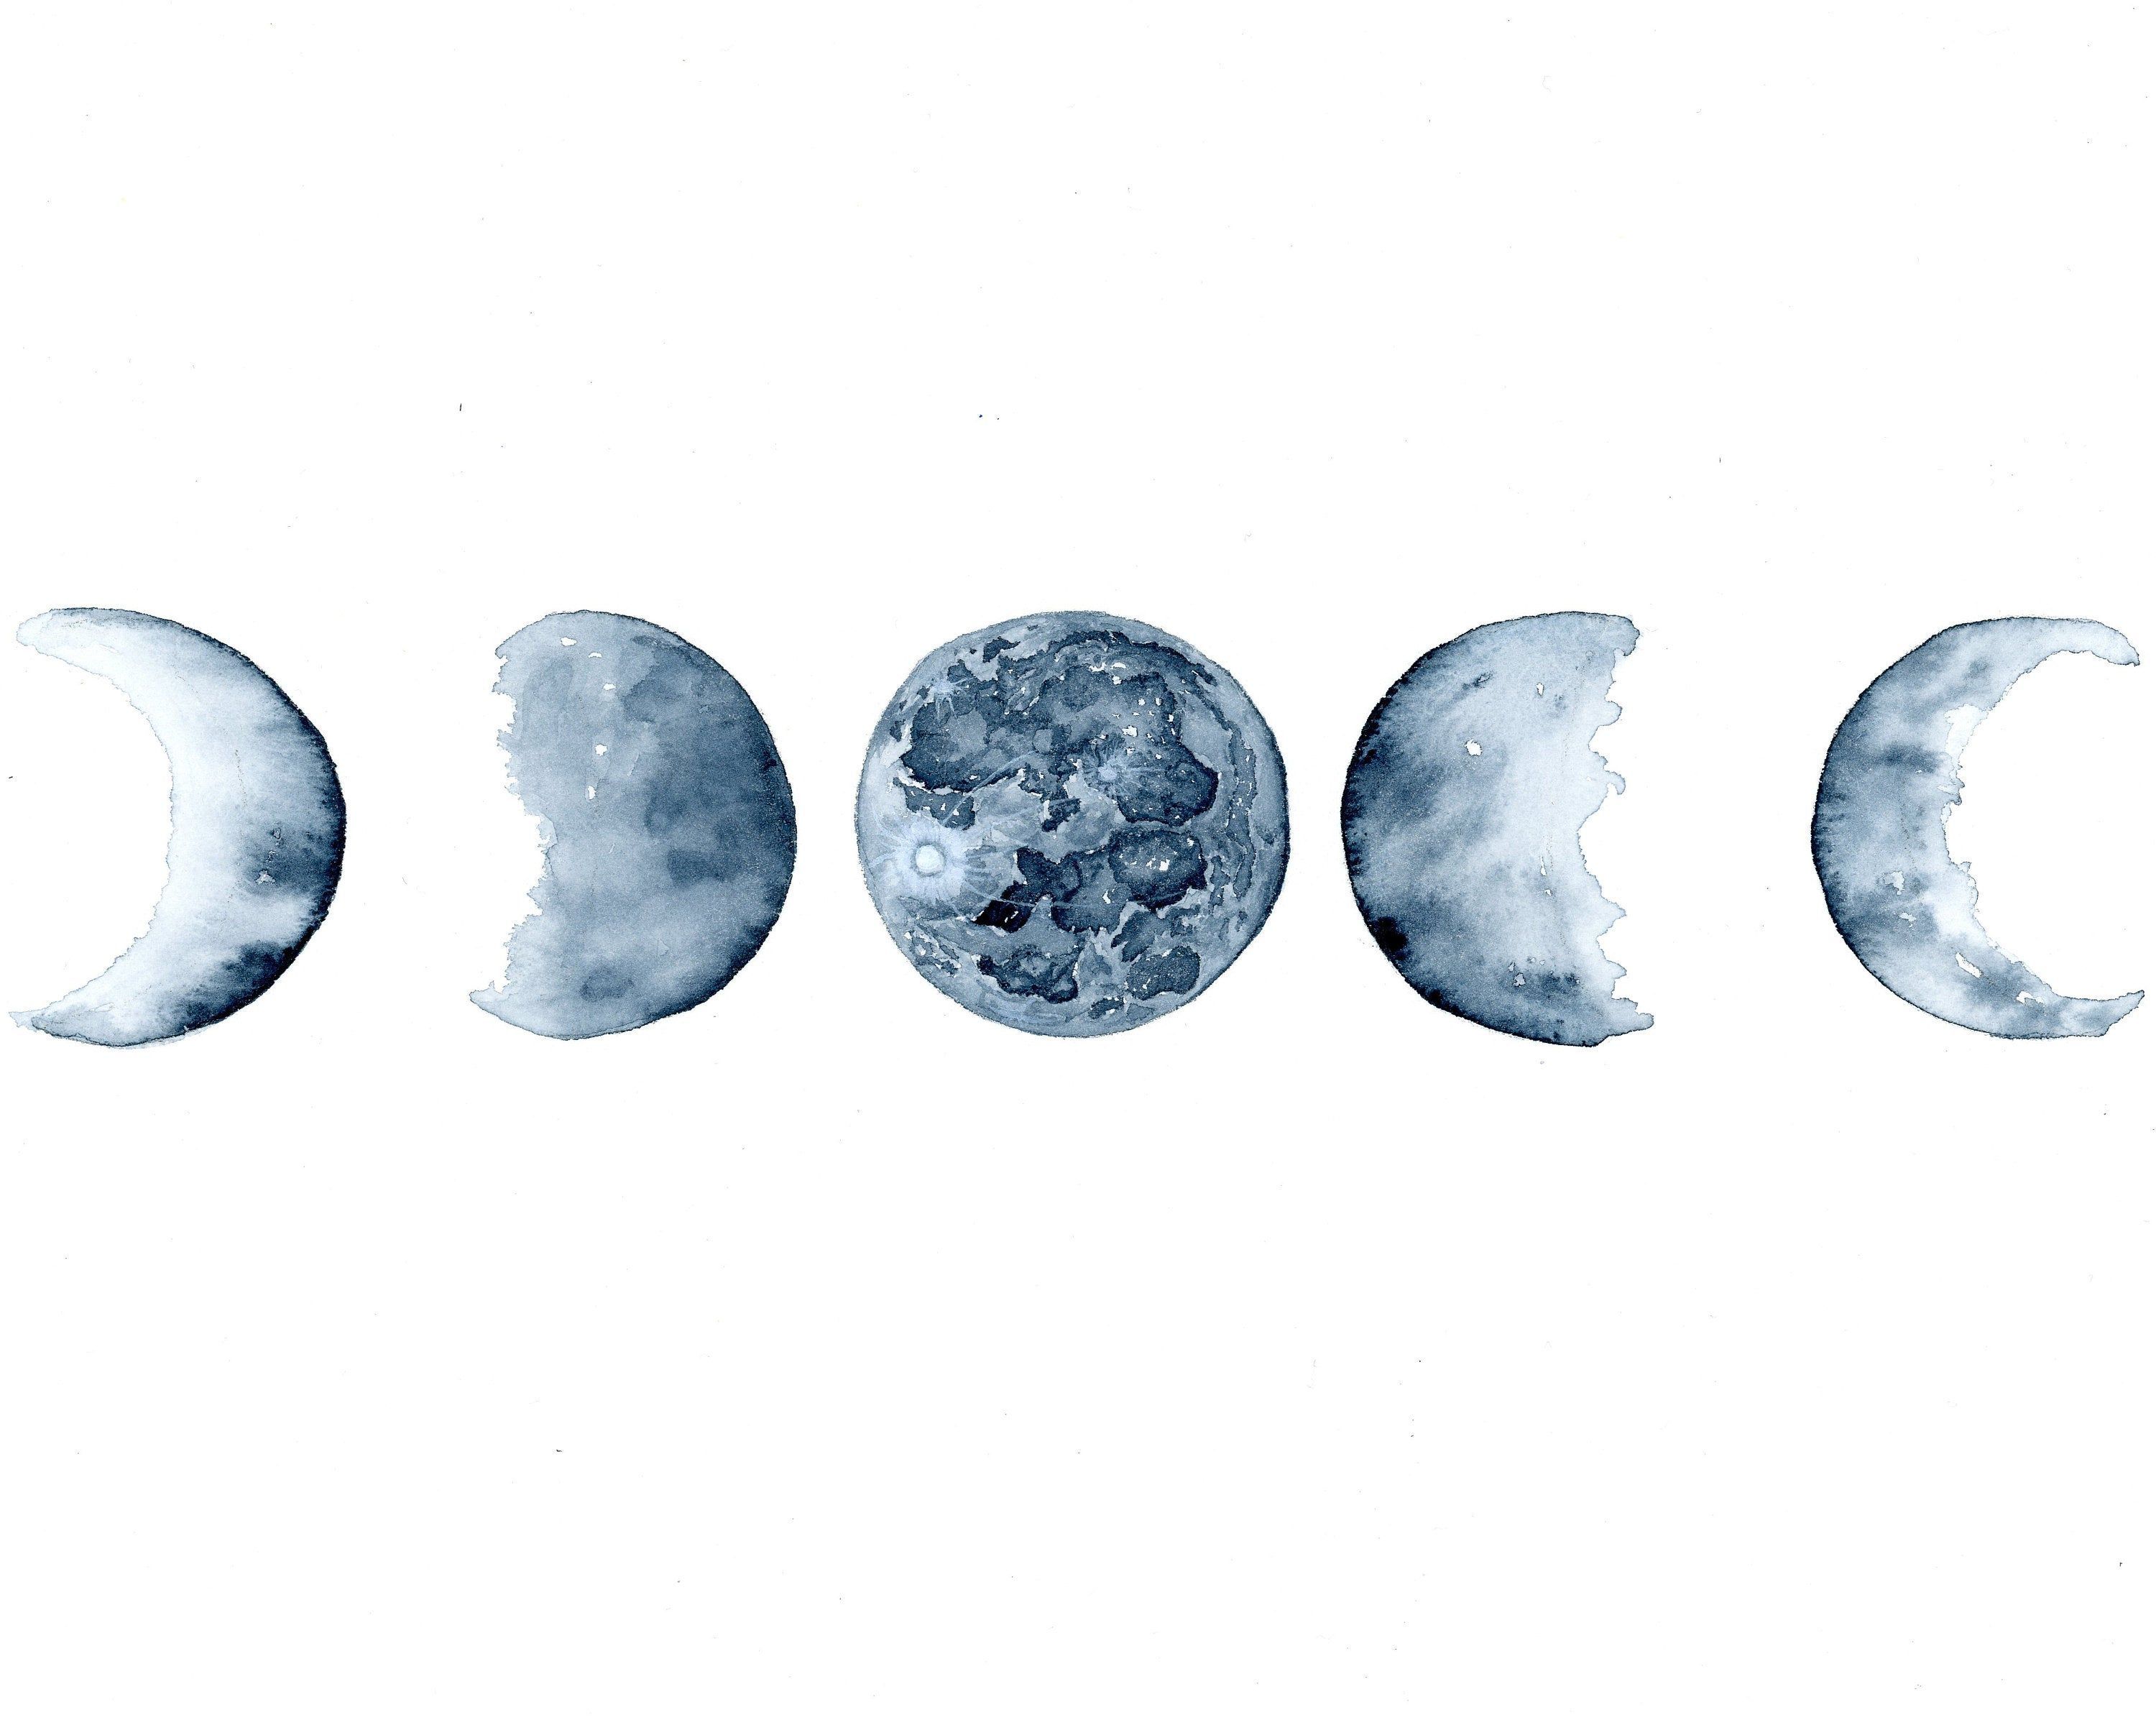 Phases of the moon - Moon phases